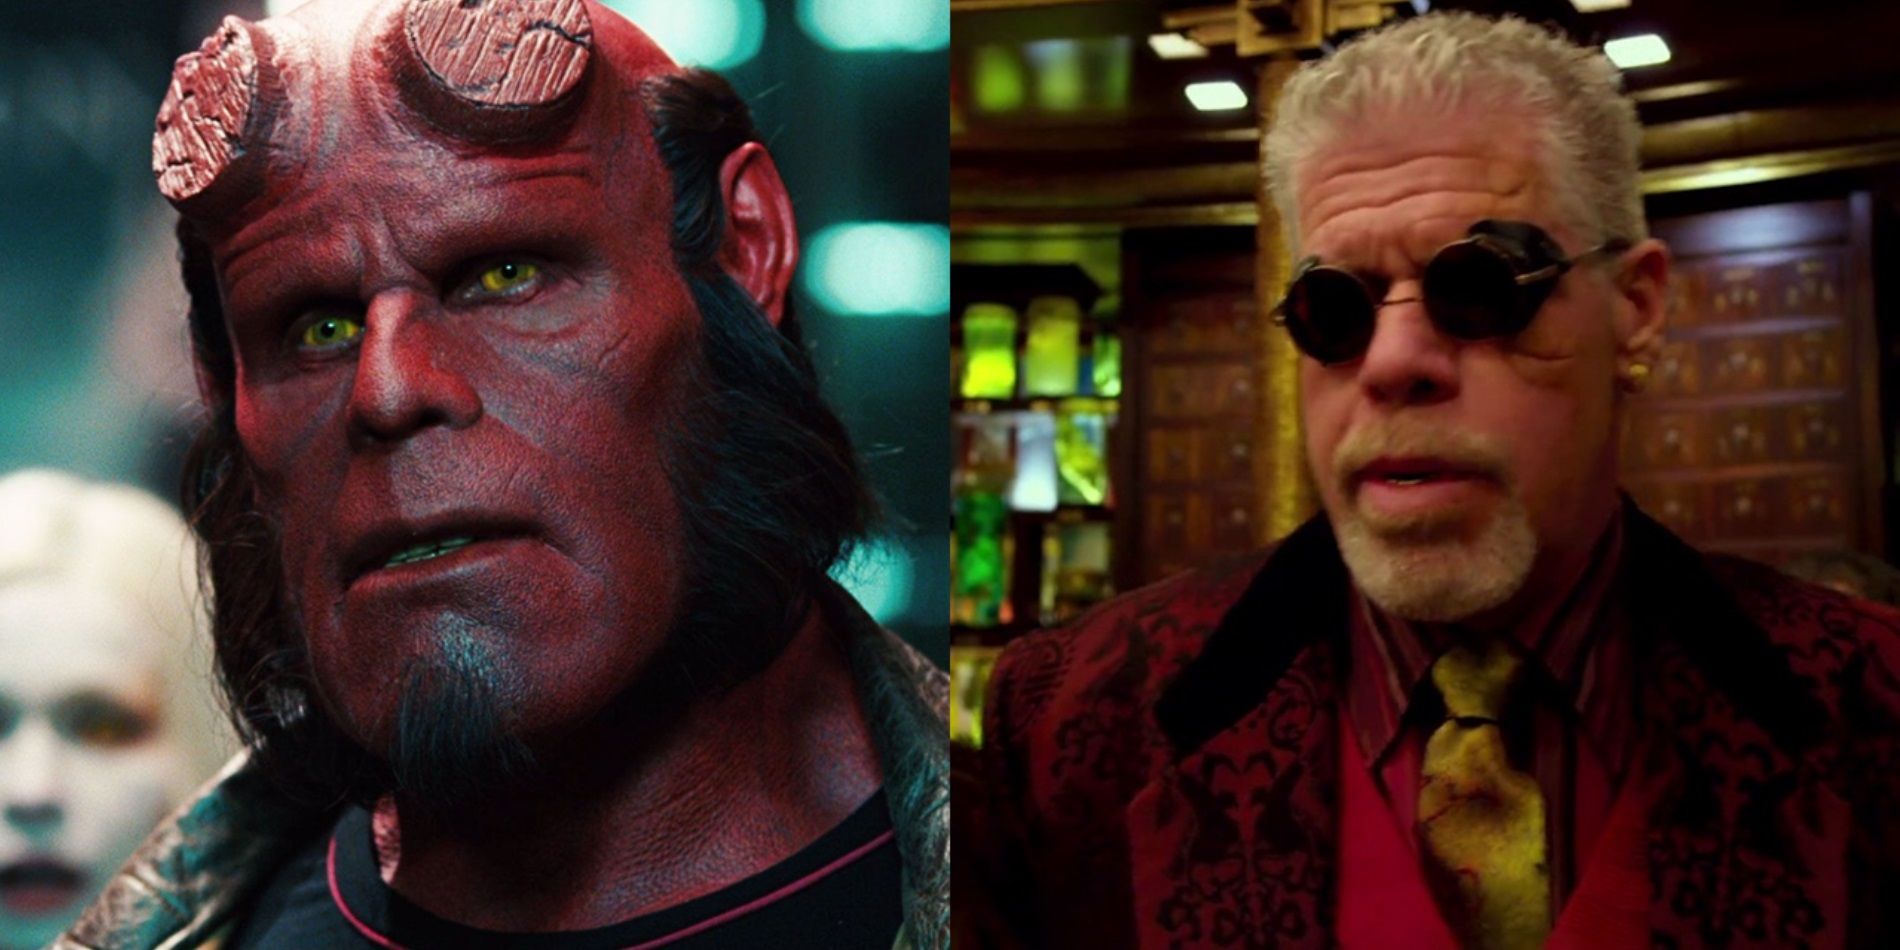 Split image of Ron Perlman in Hellboy and Pacific Rim